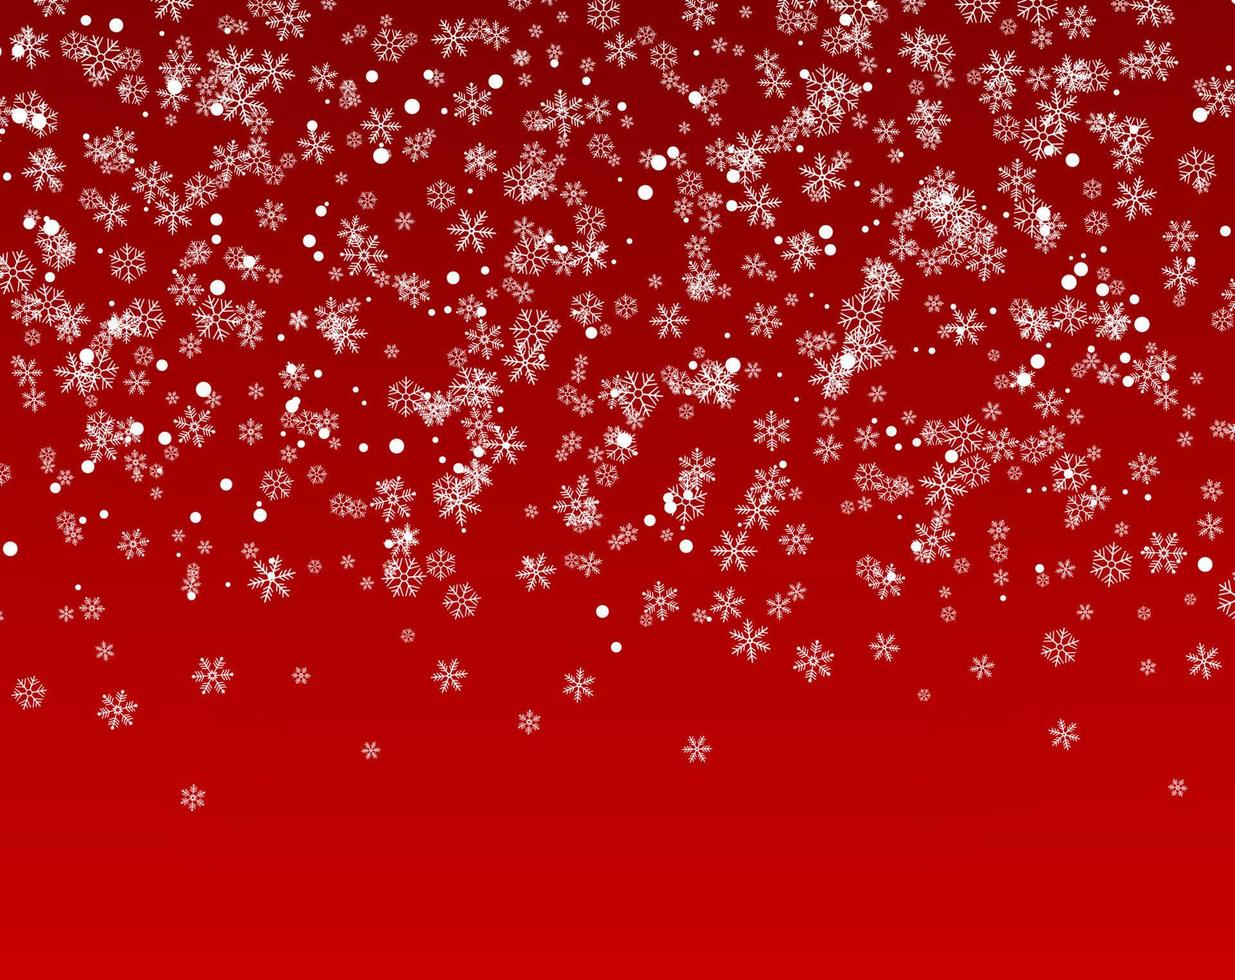 A lot of snowflakes falling from the sky vector